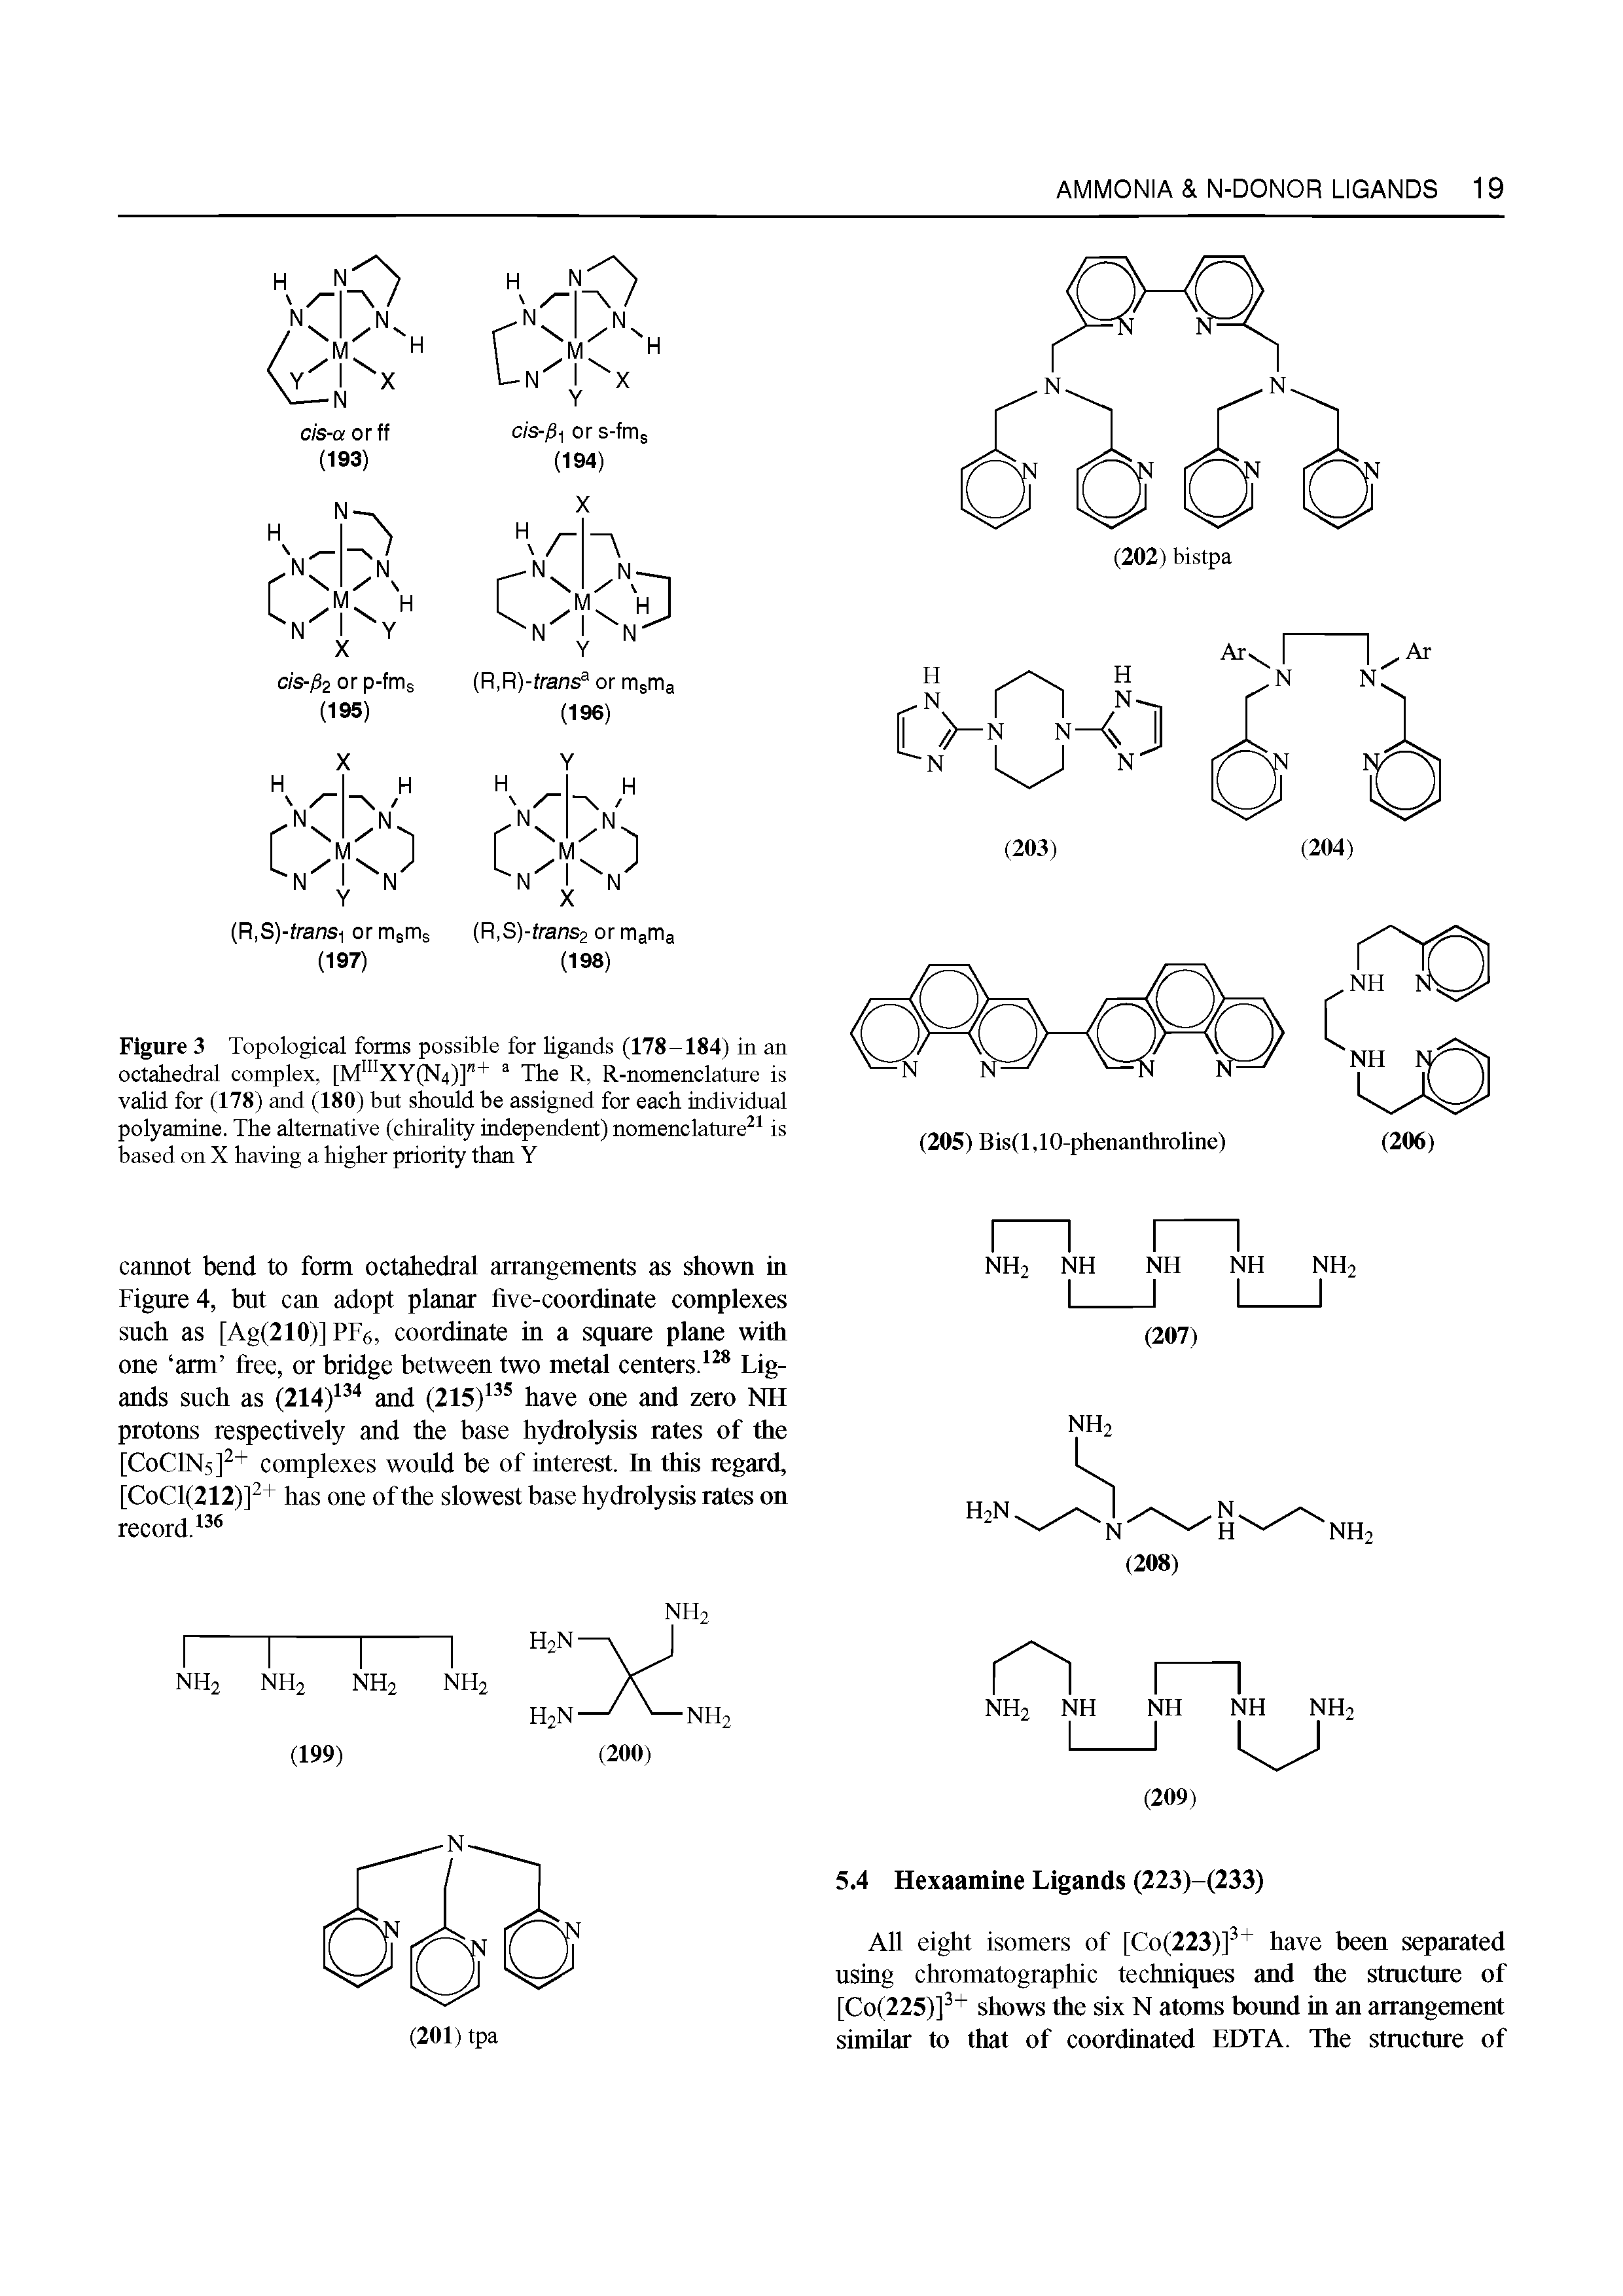 Figure 3 Topological forms possible for ligands (178-184) in an octahedral complex, [M XY(N4)]"+ The R, R-nomenclature is valid for (178) and (180) but should be assigned for each individual polyamine. The alternative (chirality independent) nomenclature is based on X having a higher priority than Y...